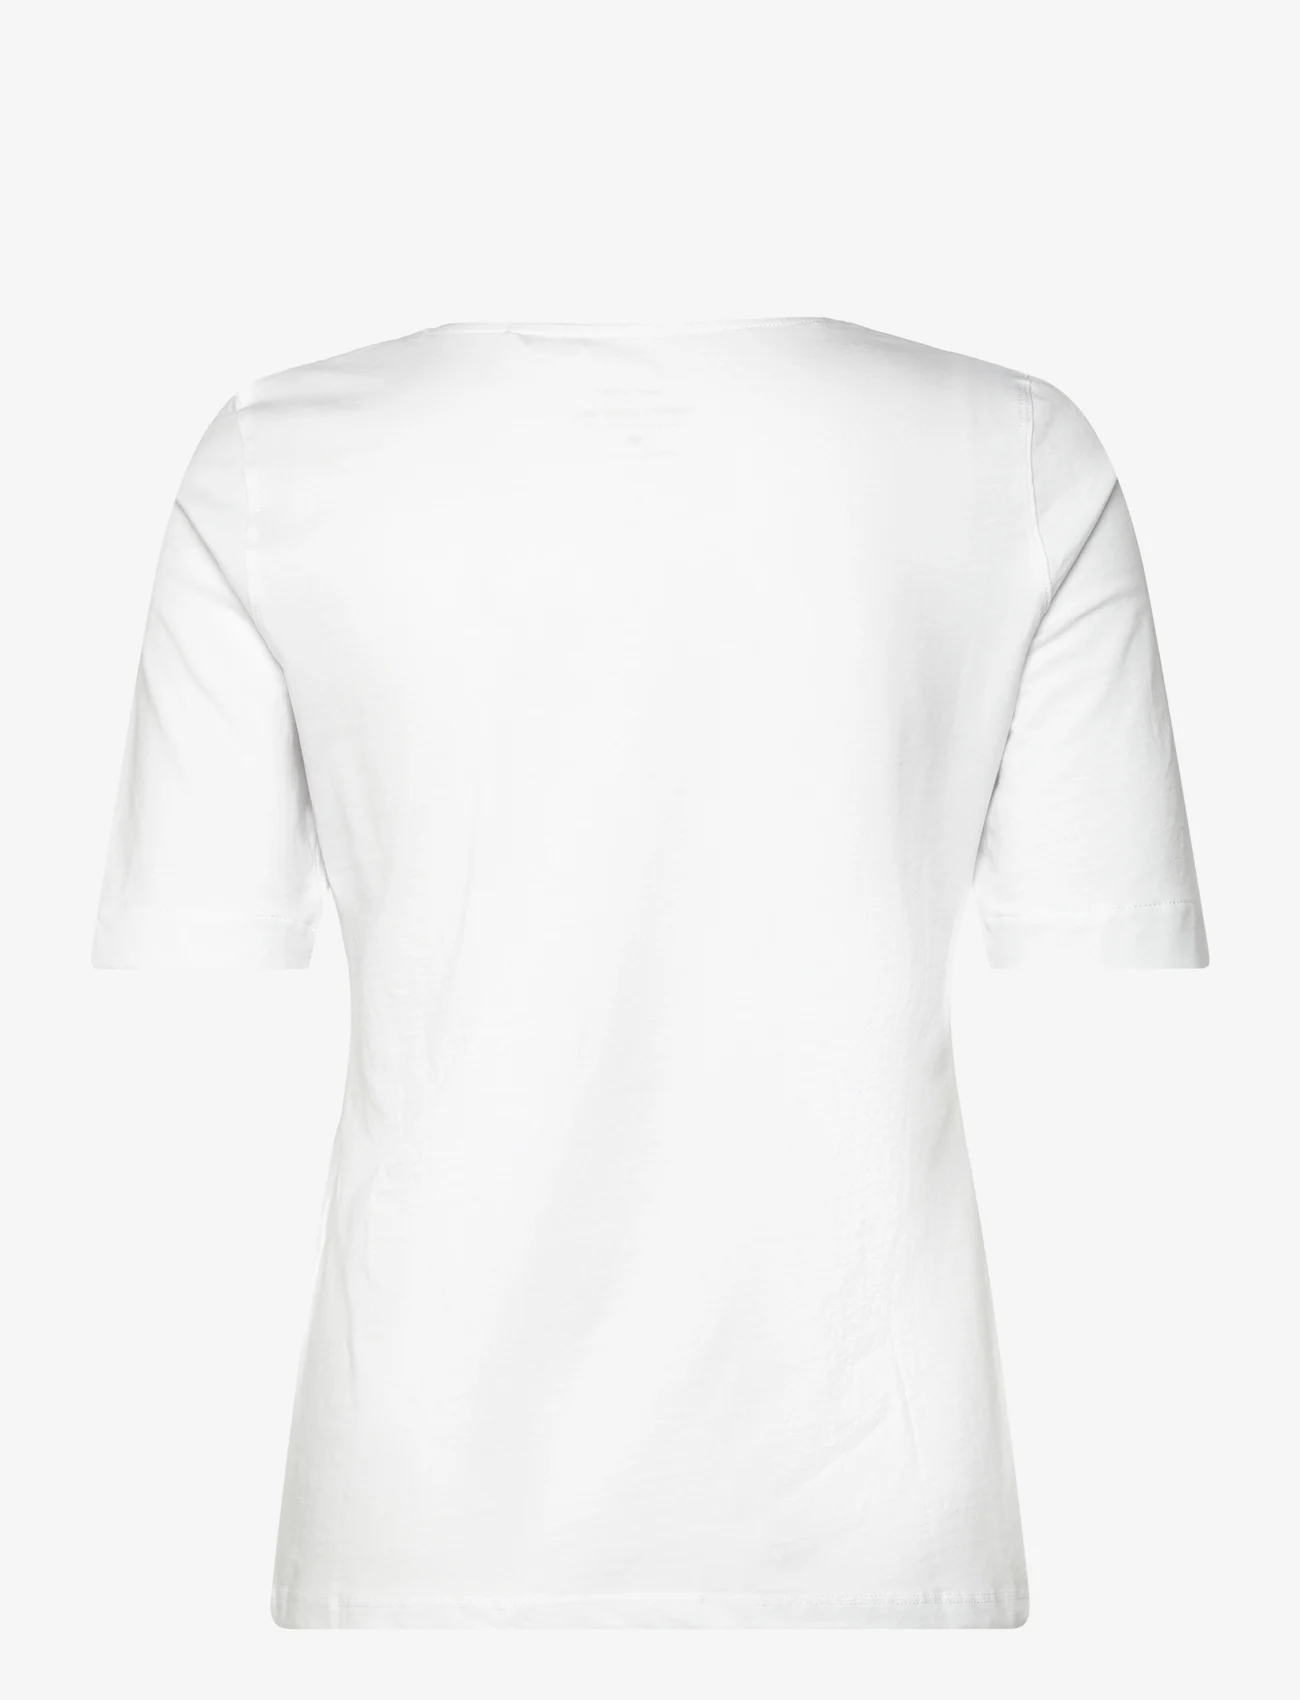 Gerry Weber Edition - T-SHIRT 1/2 SLEEVE - t-shirt & tops - white/white - 1